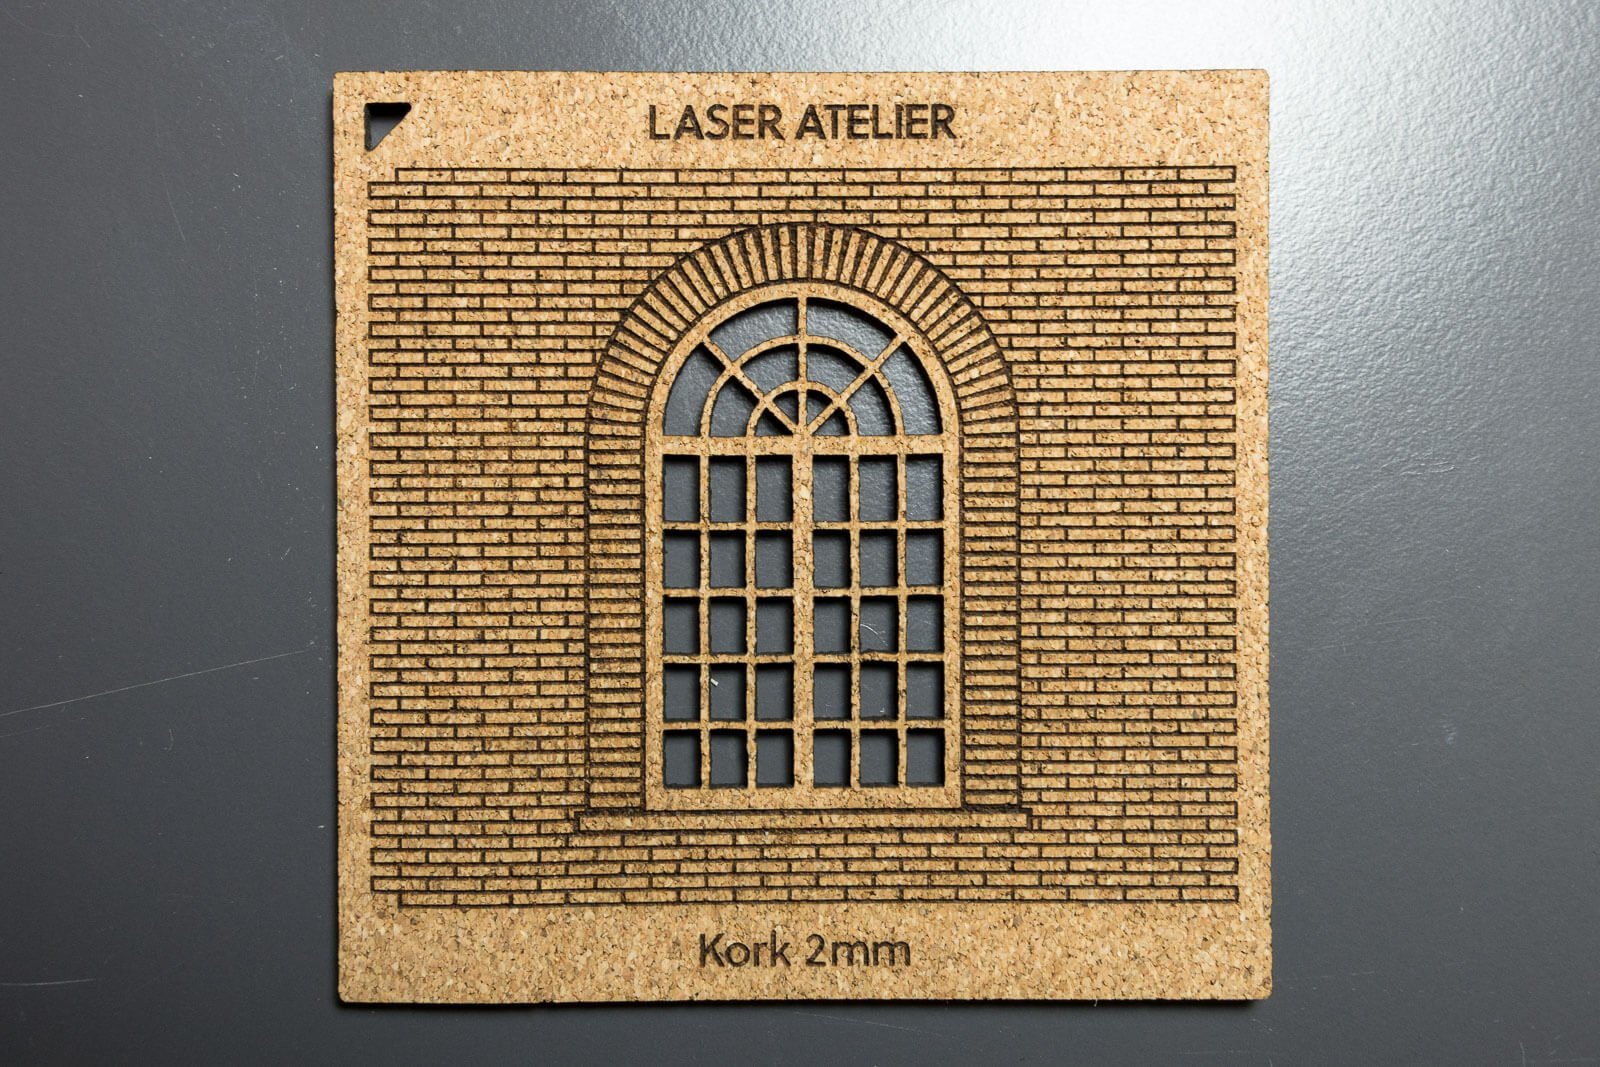 Paper and cardboard - cutting and engraving - Laser Atelier